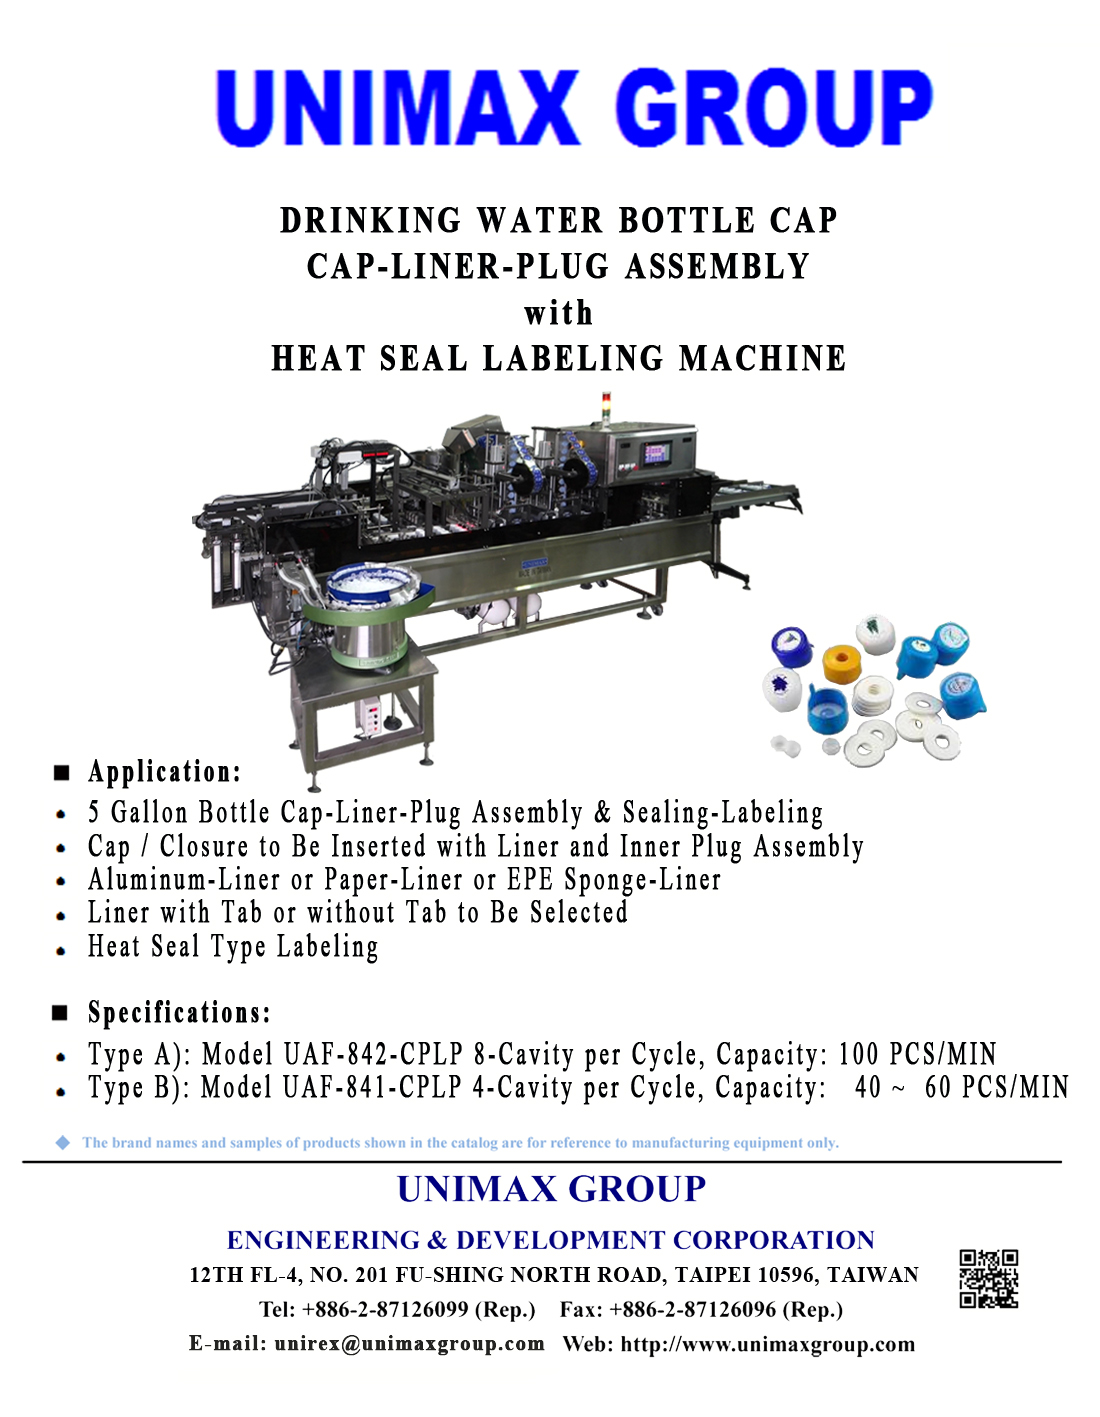 5-Gallon Drinking Water Bottle Cap Automatic Liner-Cap Assembly & Seal Labeling Machine